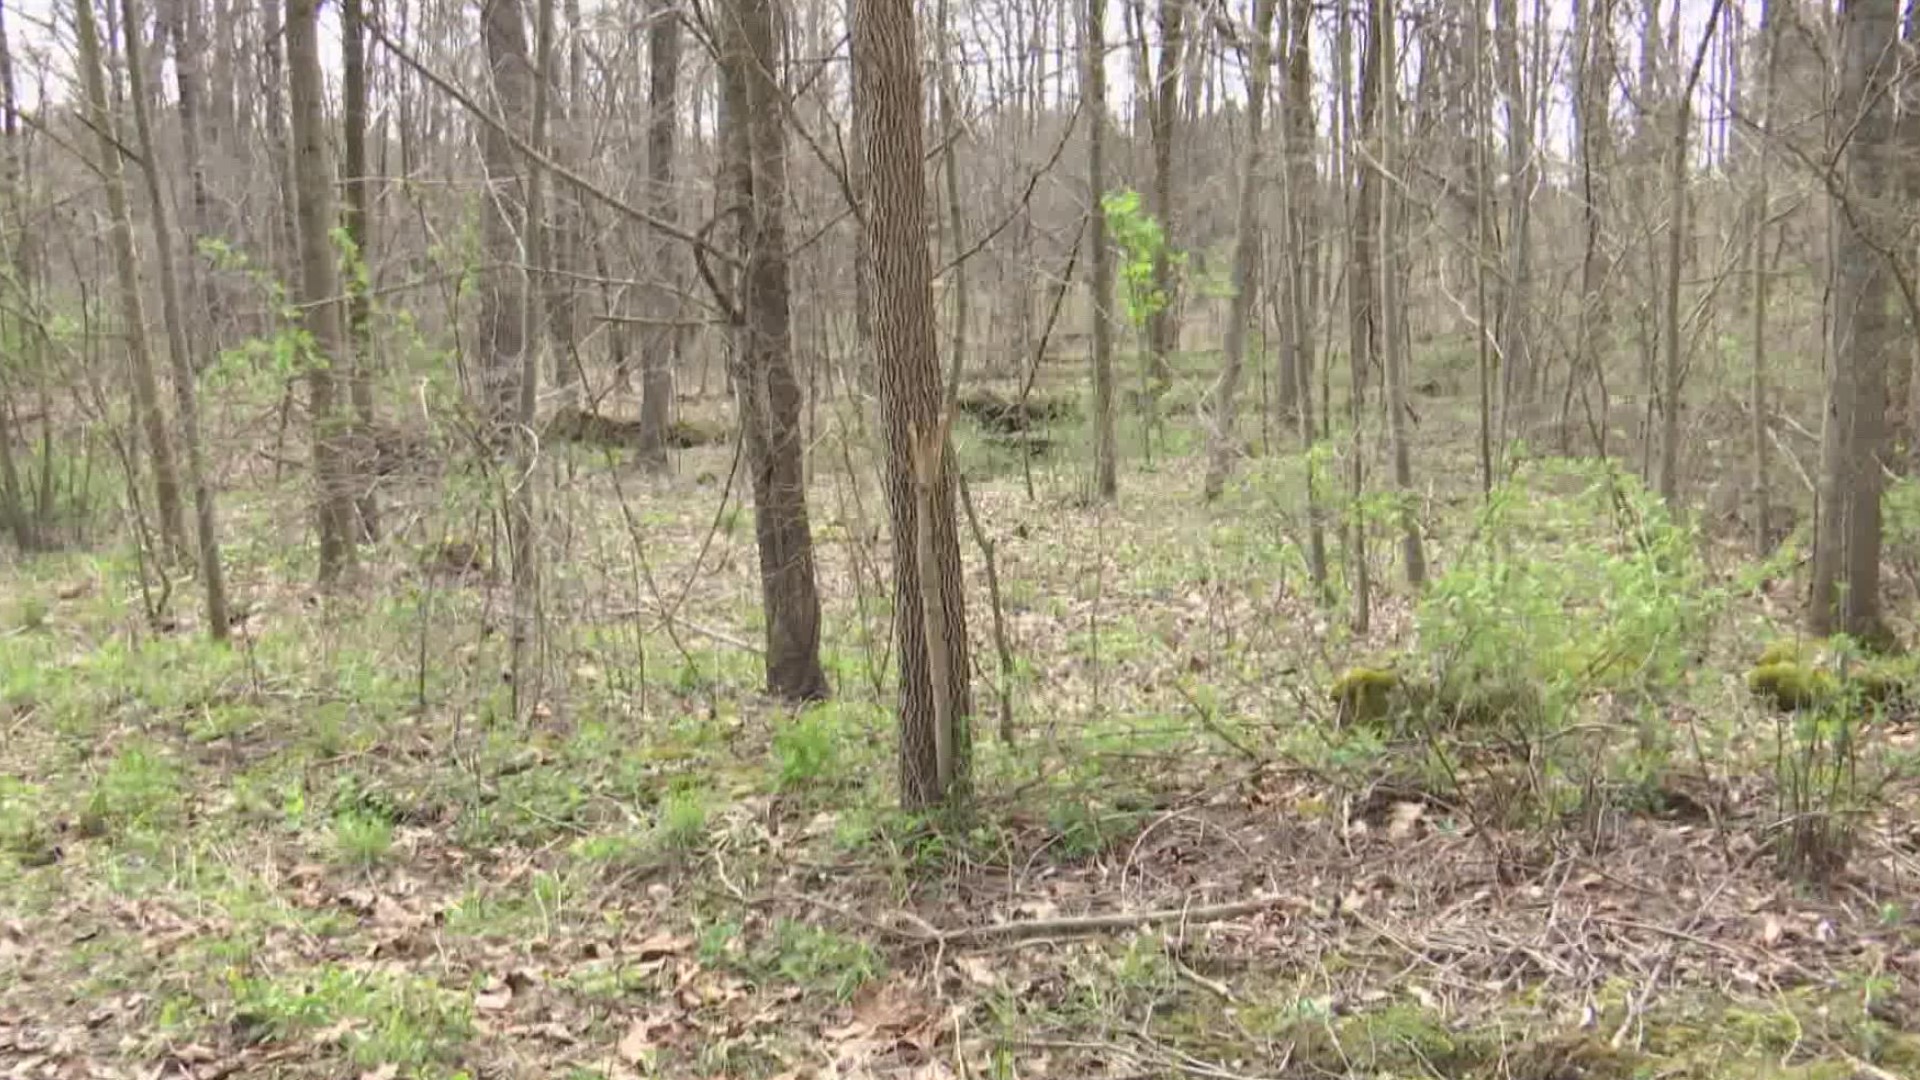 A man was hunting for mushrooms in these woods near his home when he came across a suitcase. The body of a little boy was inside.